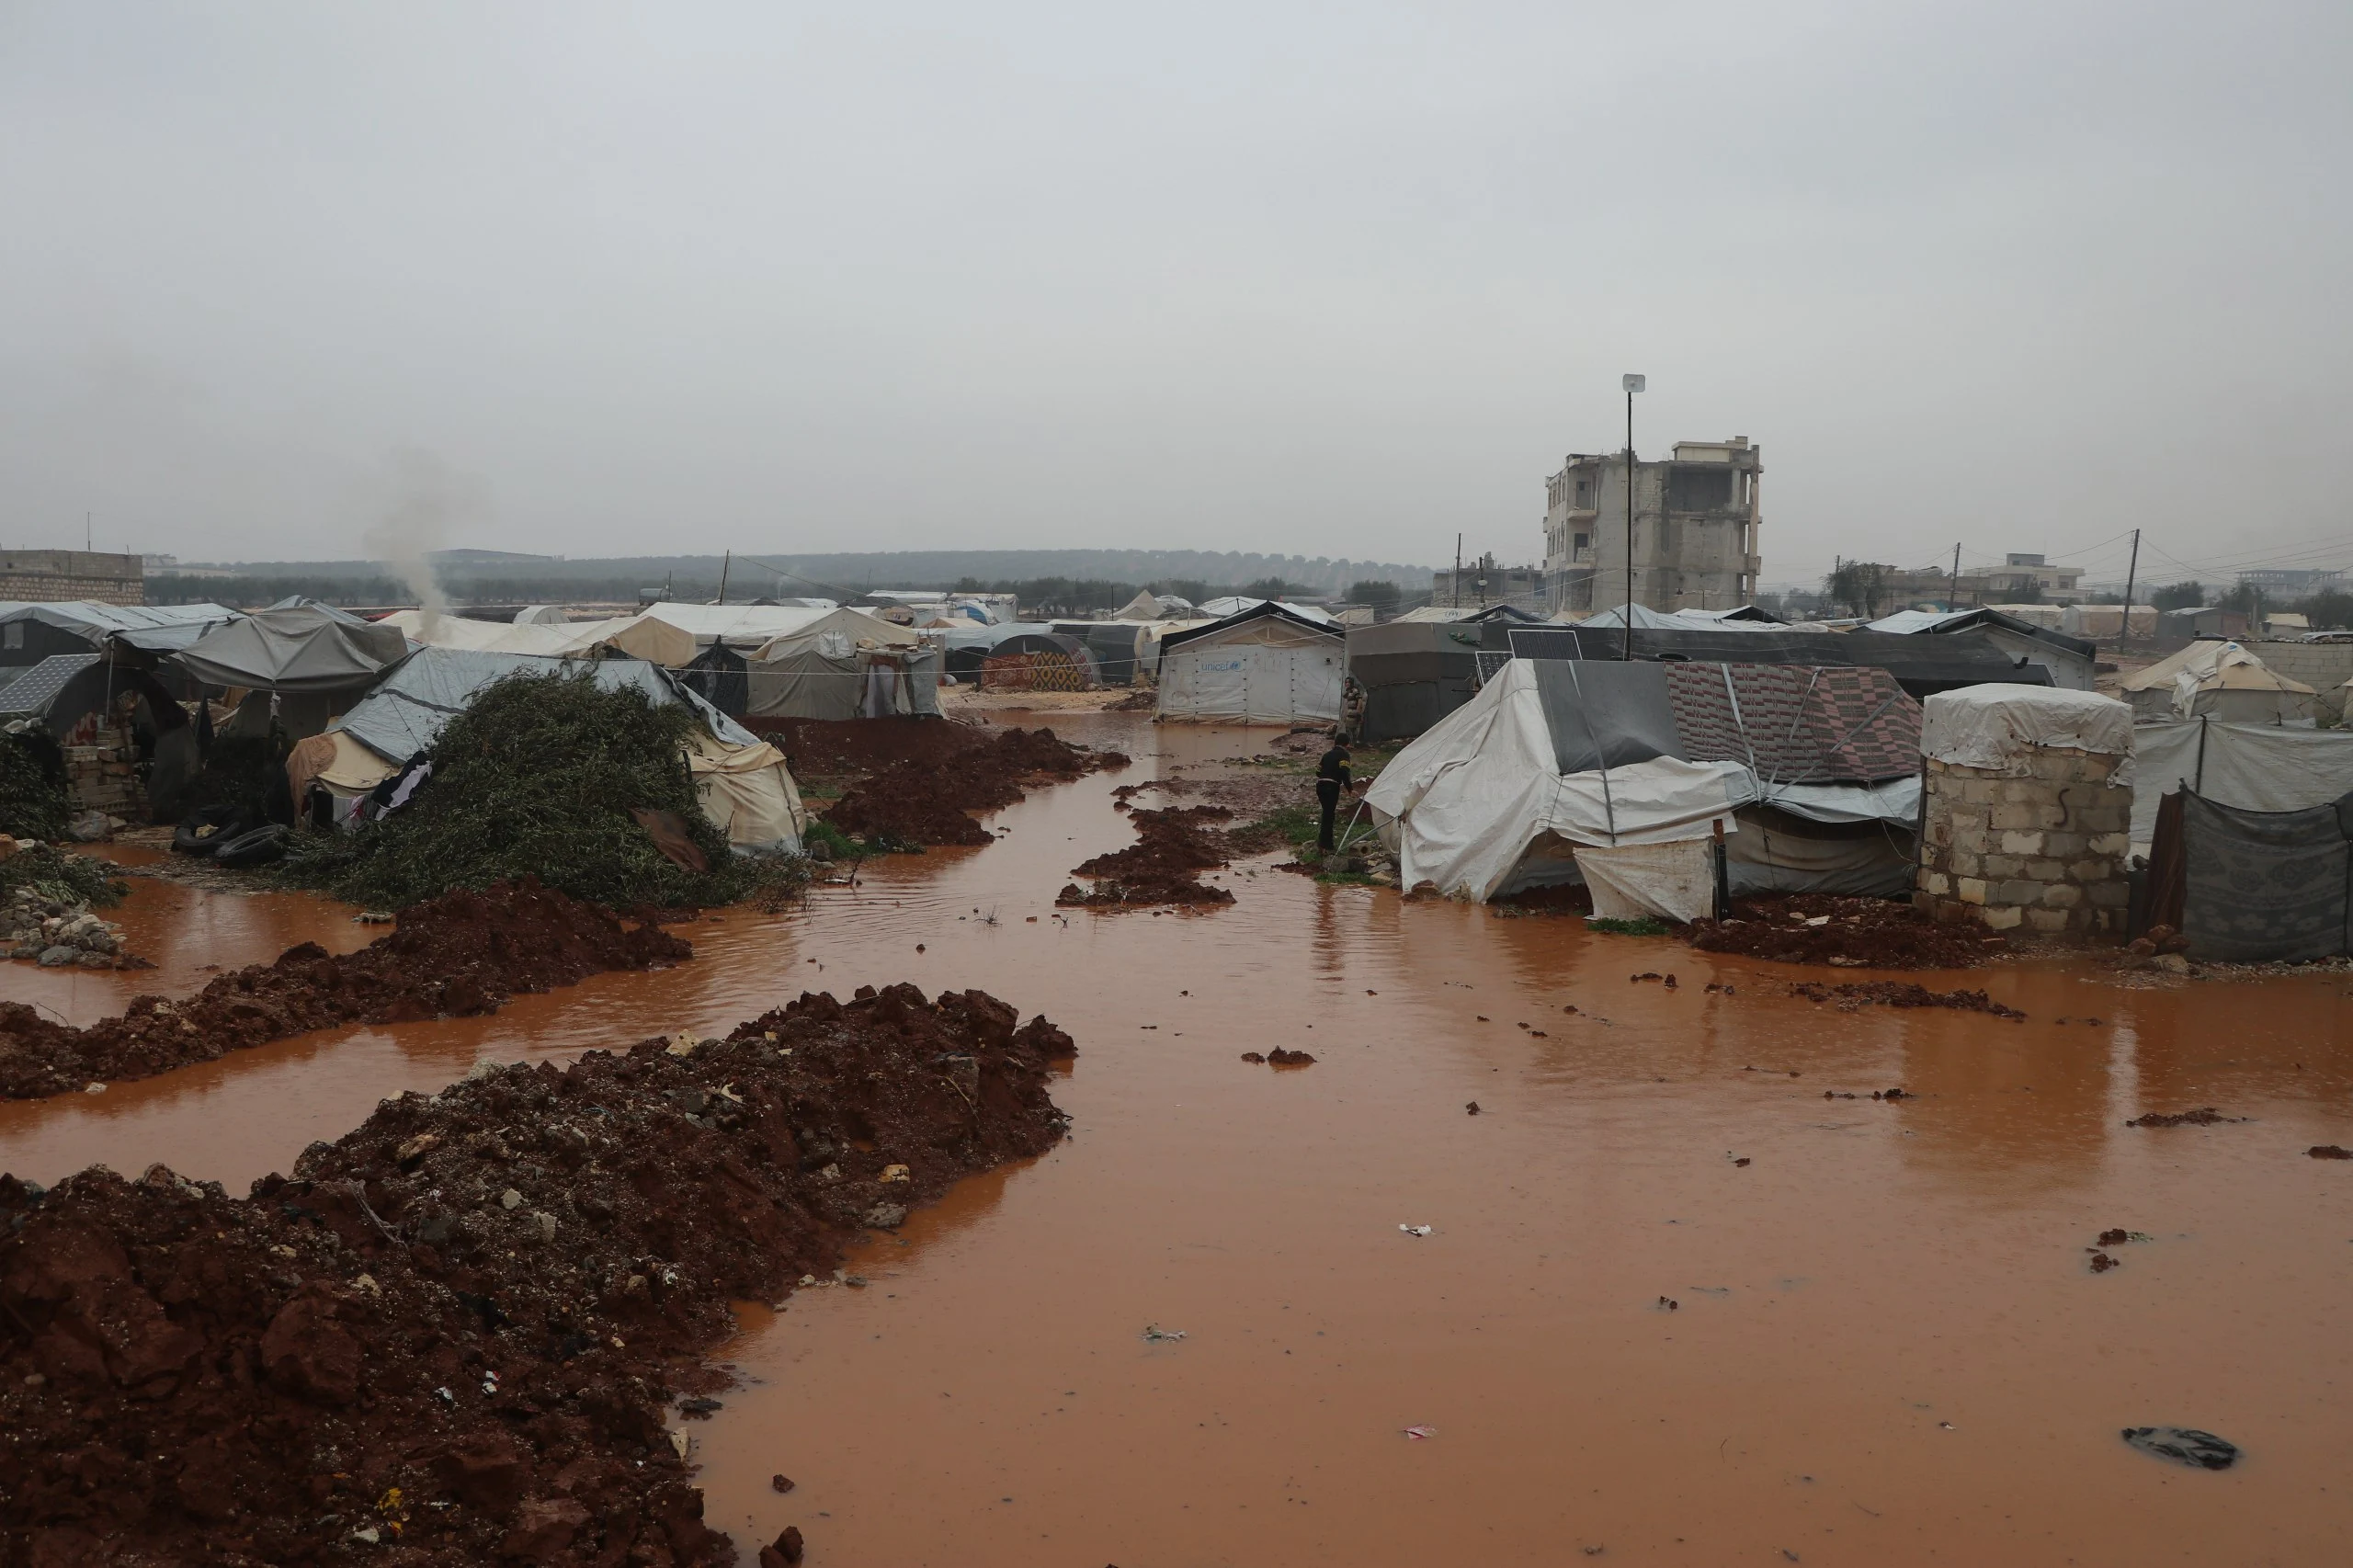 water permeating 20 tents in al-Karam Camp near Jendeires town in the rural areas of Afrin city in northwestern Aleppo governorate